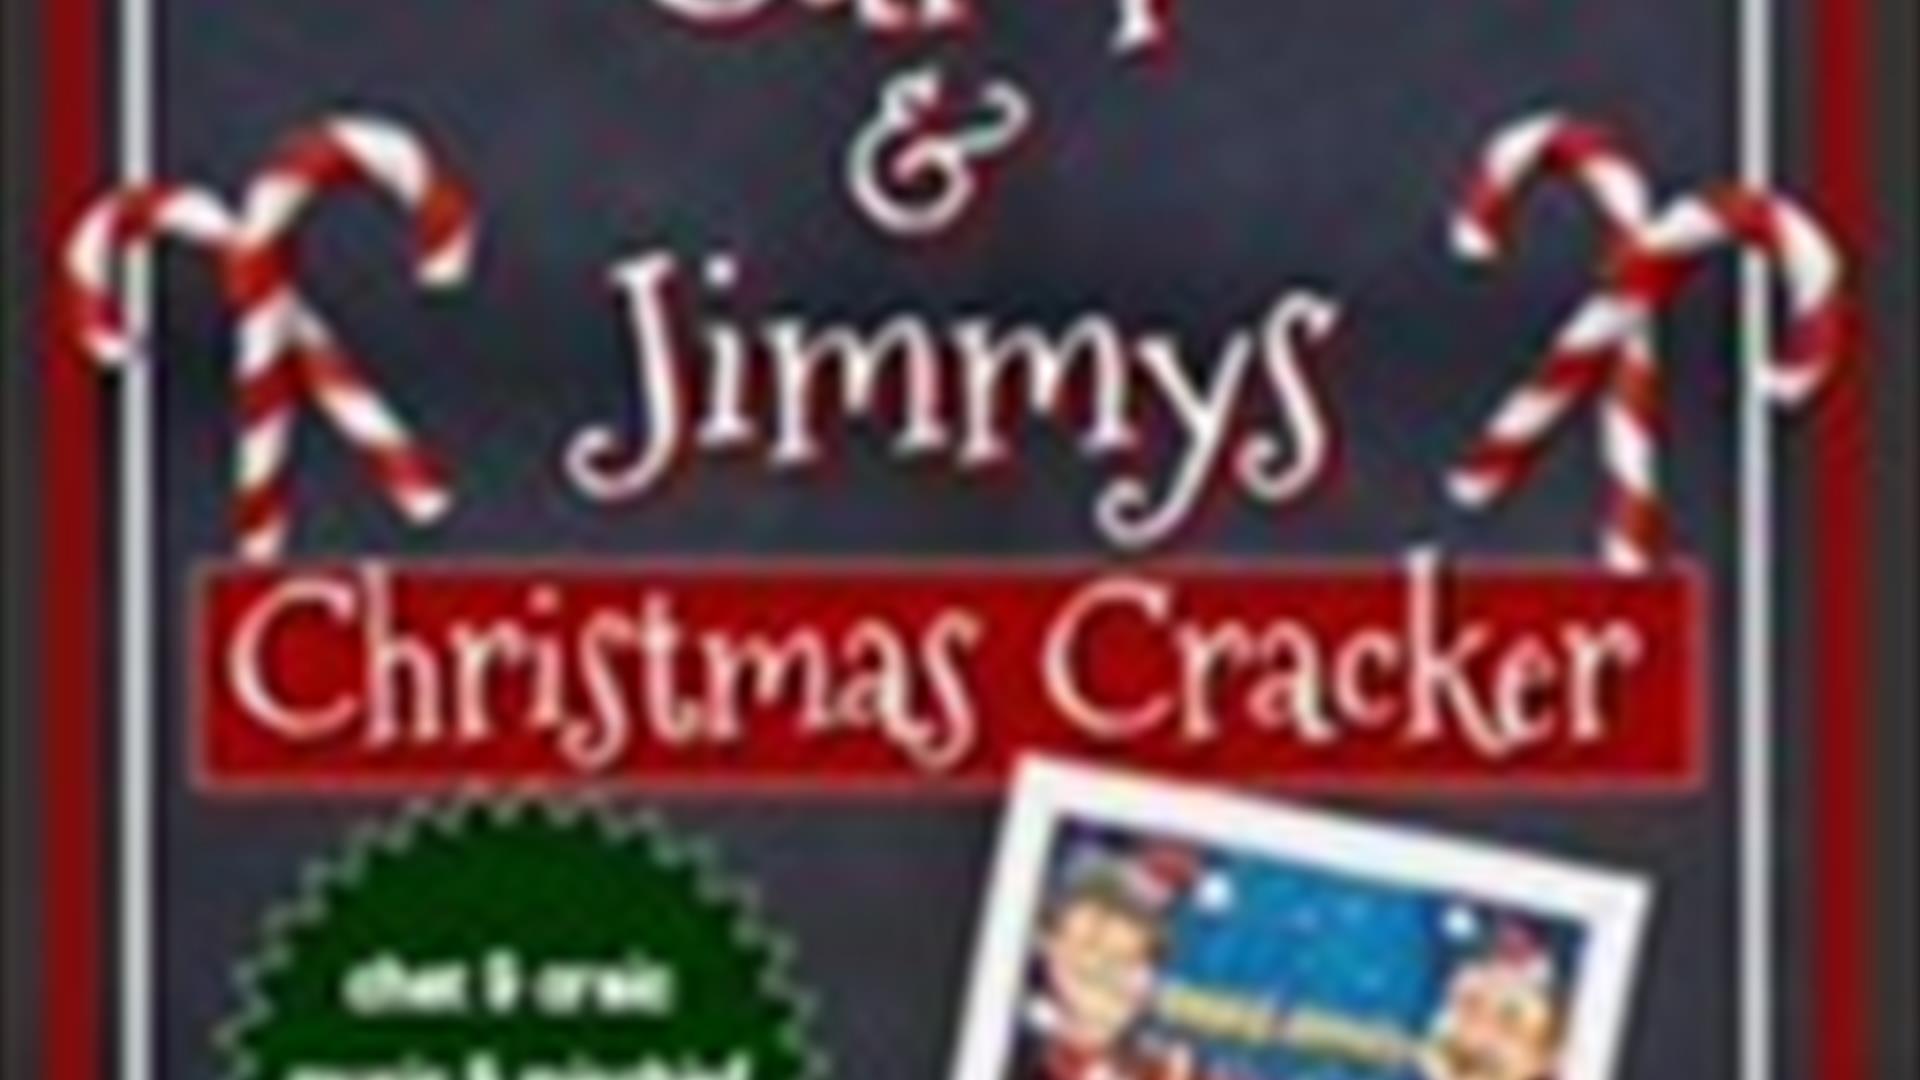 A Christmas themed poster of Jimmy and Carol